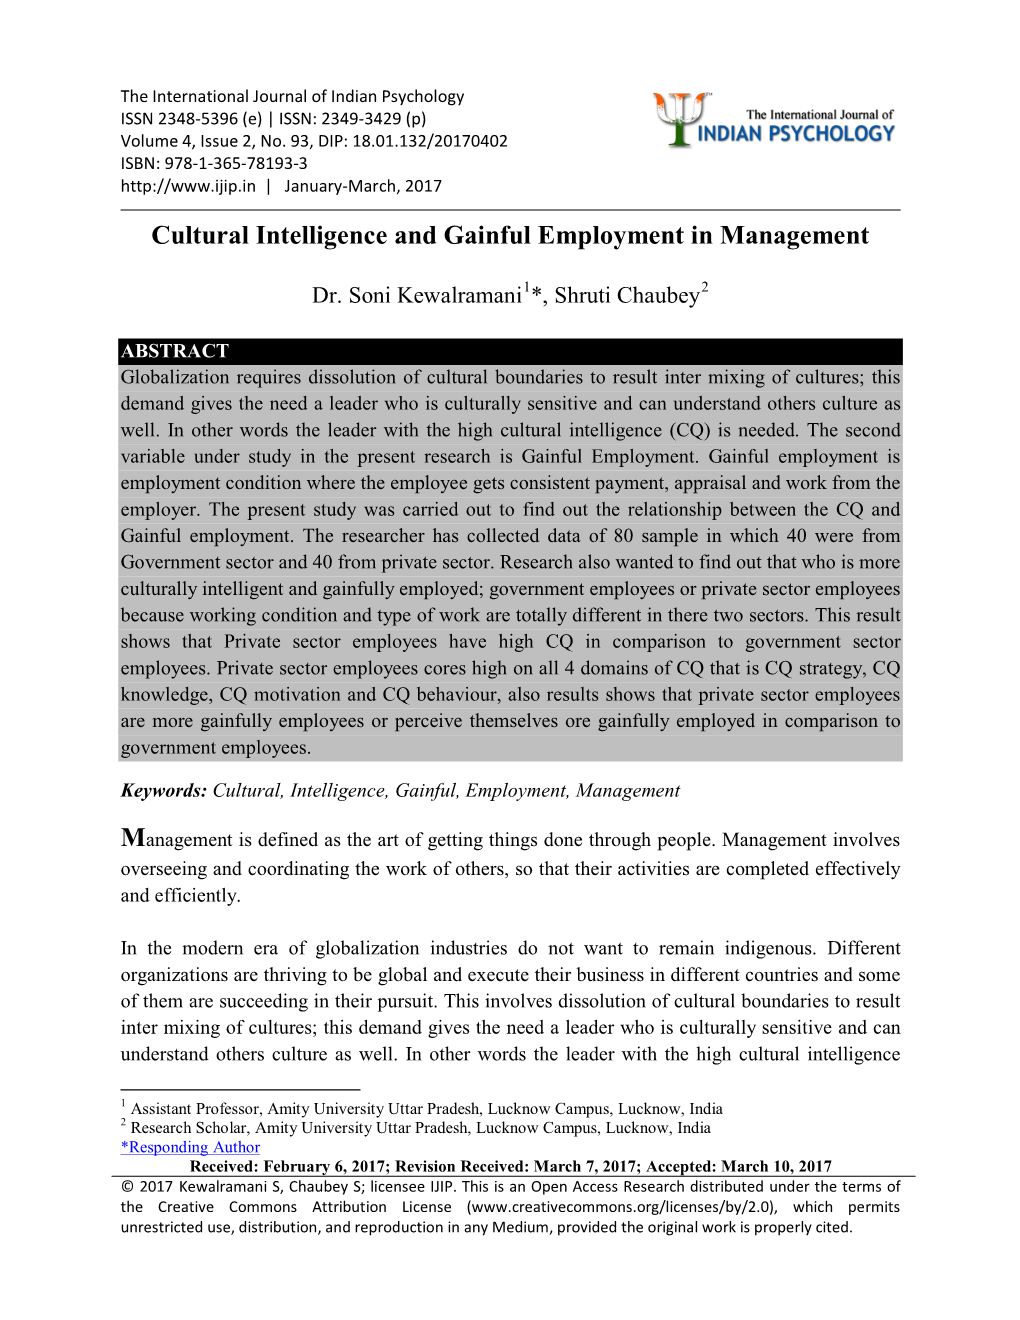 Cultural Intelligence and Gainful Employment in Management